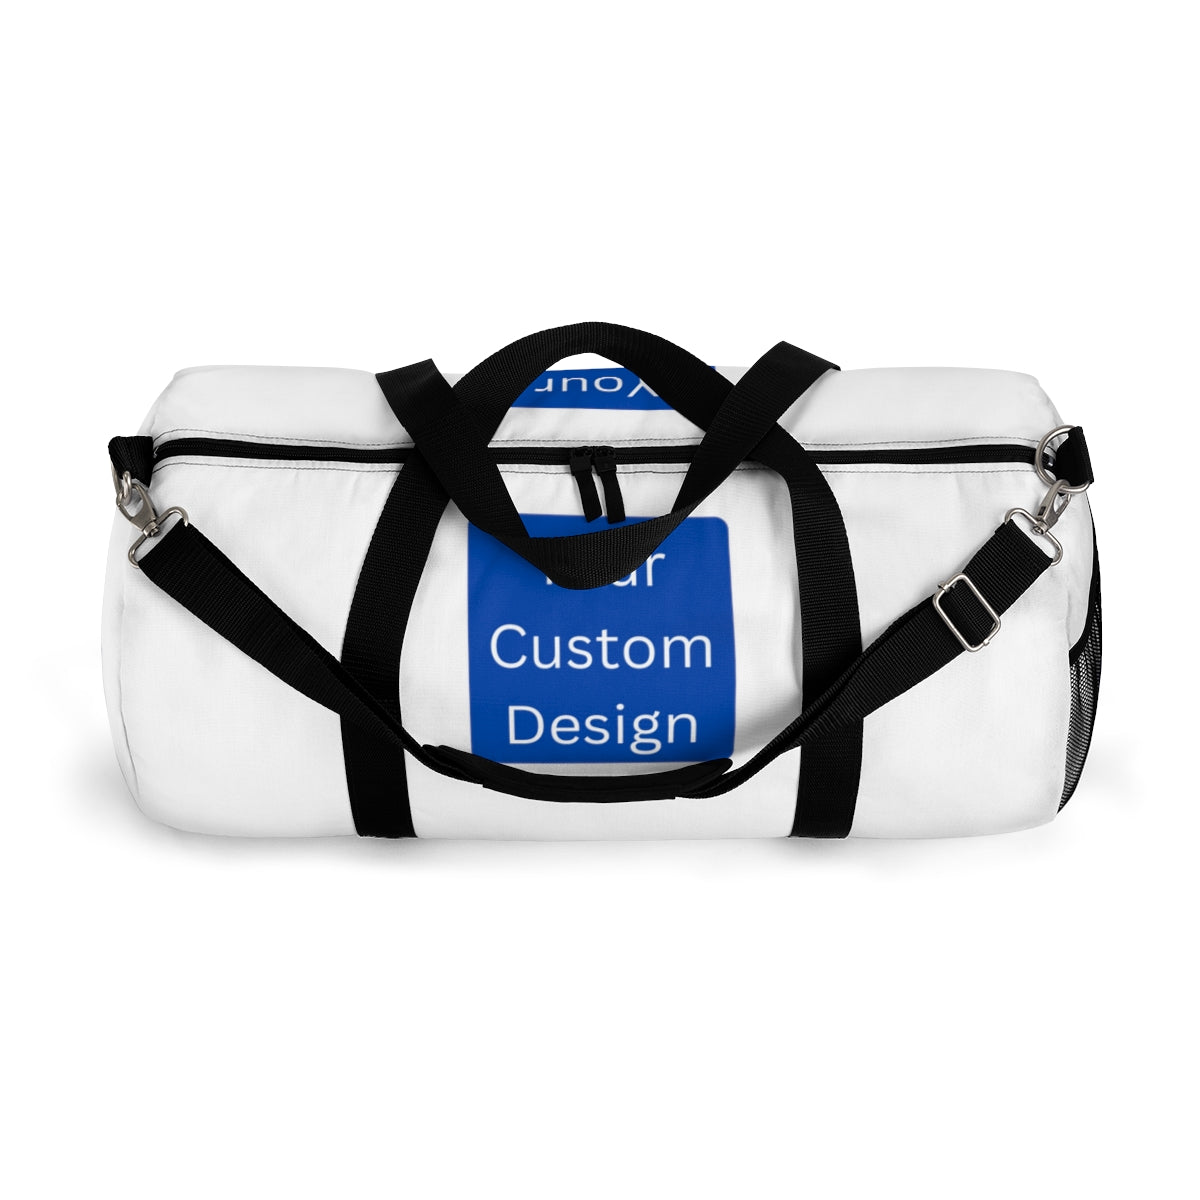 Duffel Bag with All Over Print or Custom Design Placement